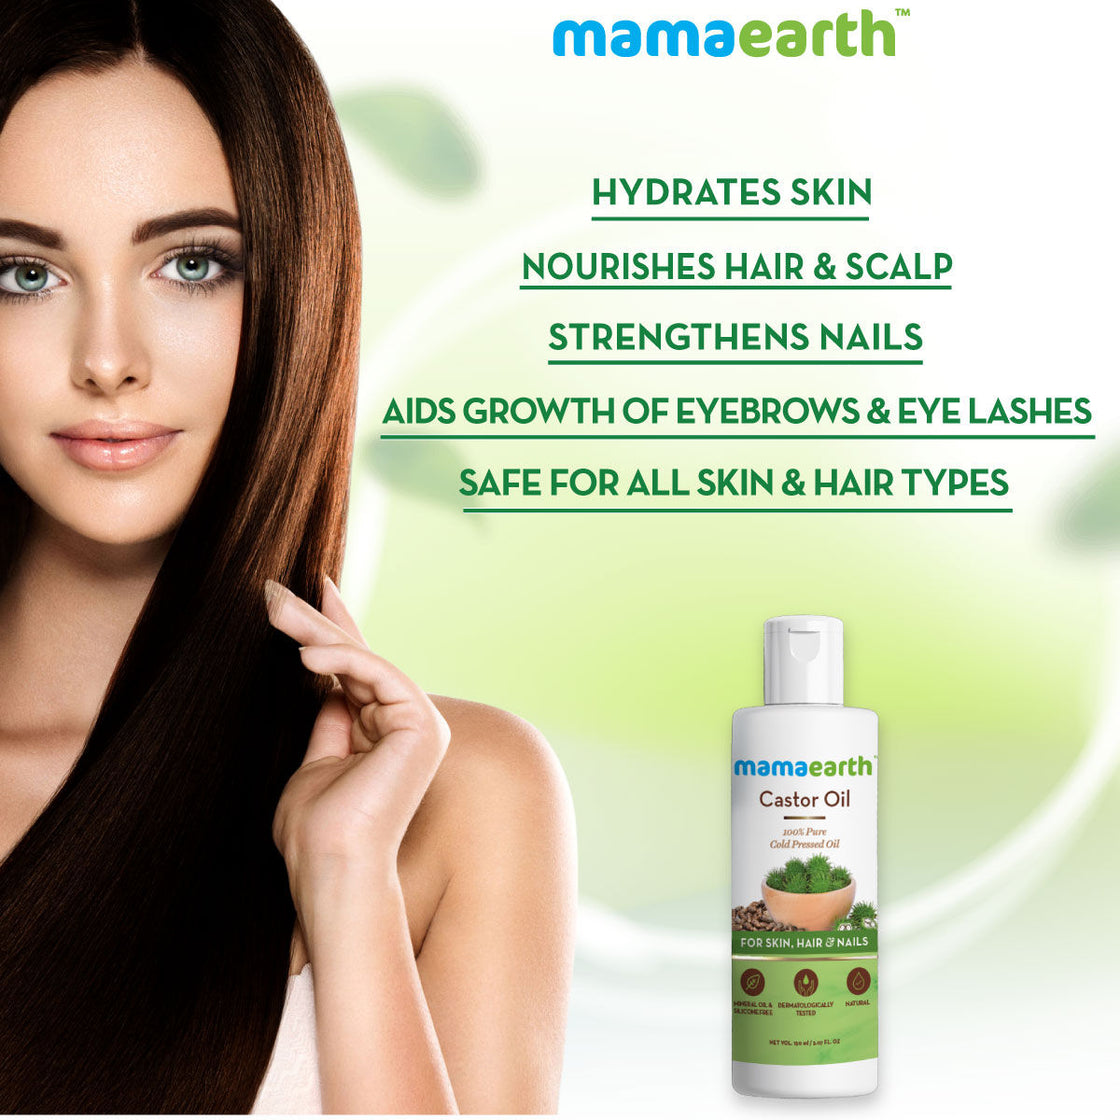 Mamaearth Castor Oil 100% Pure Cold Pressed Oil For Skin- Hair & Nails-2